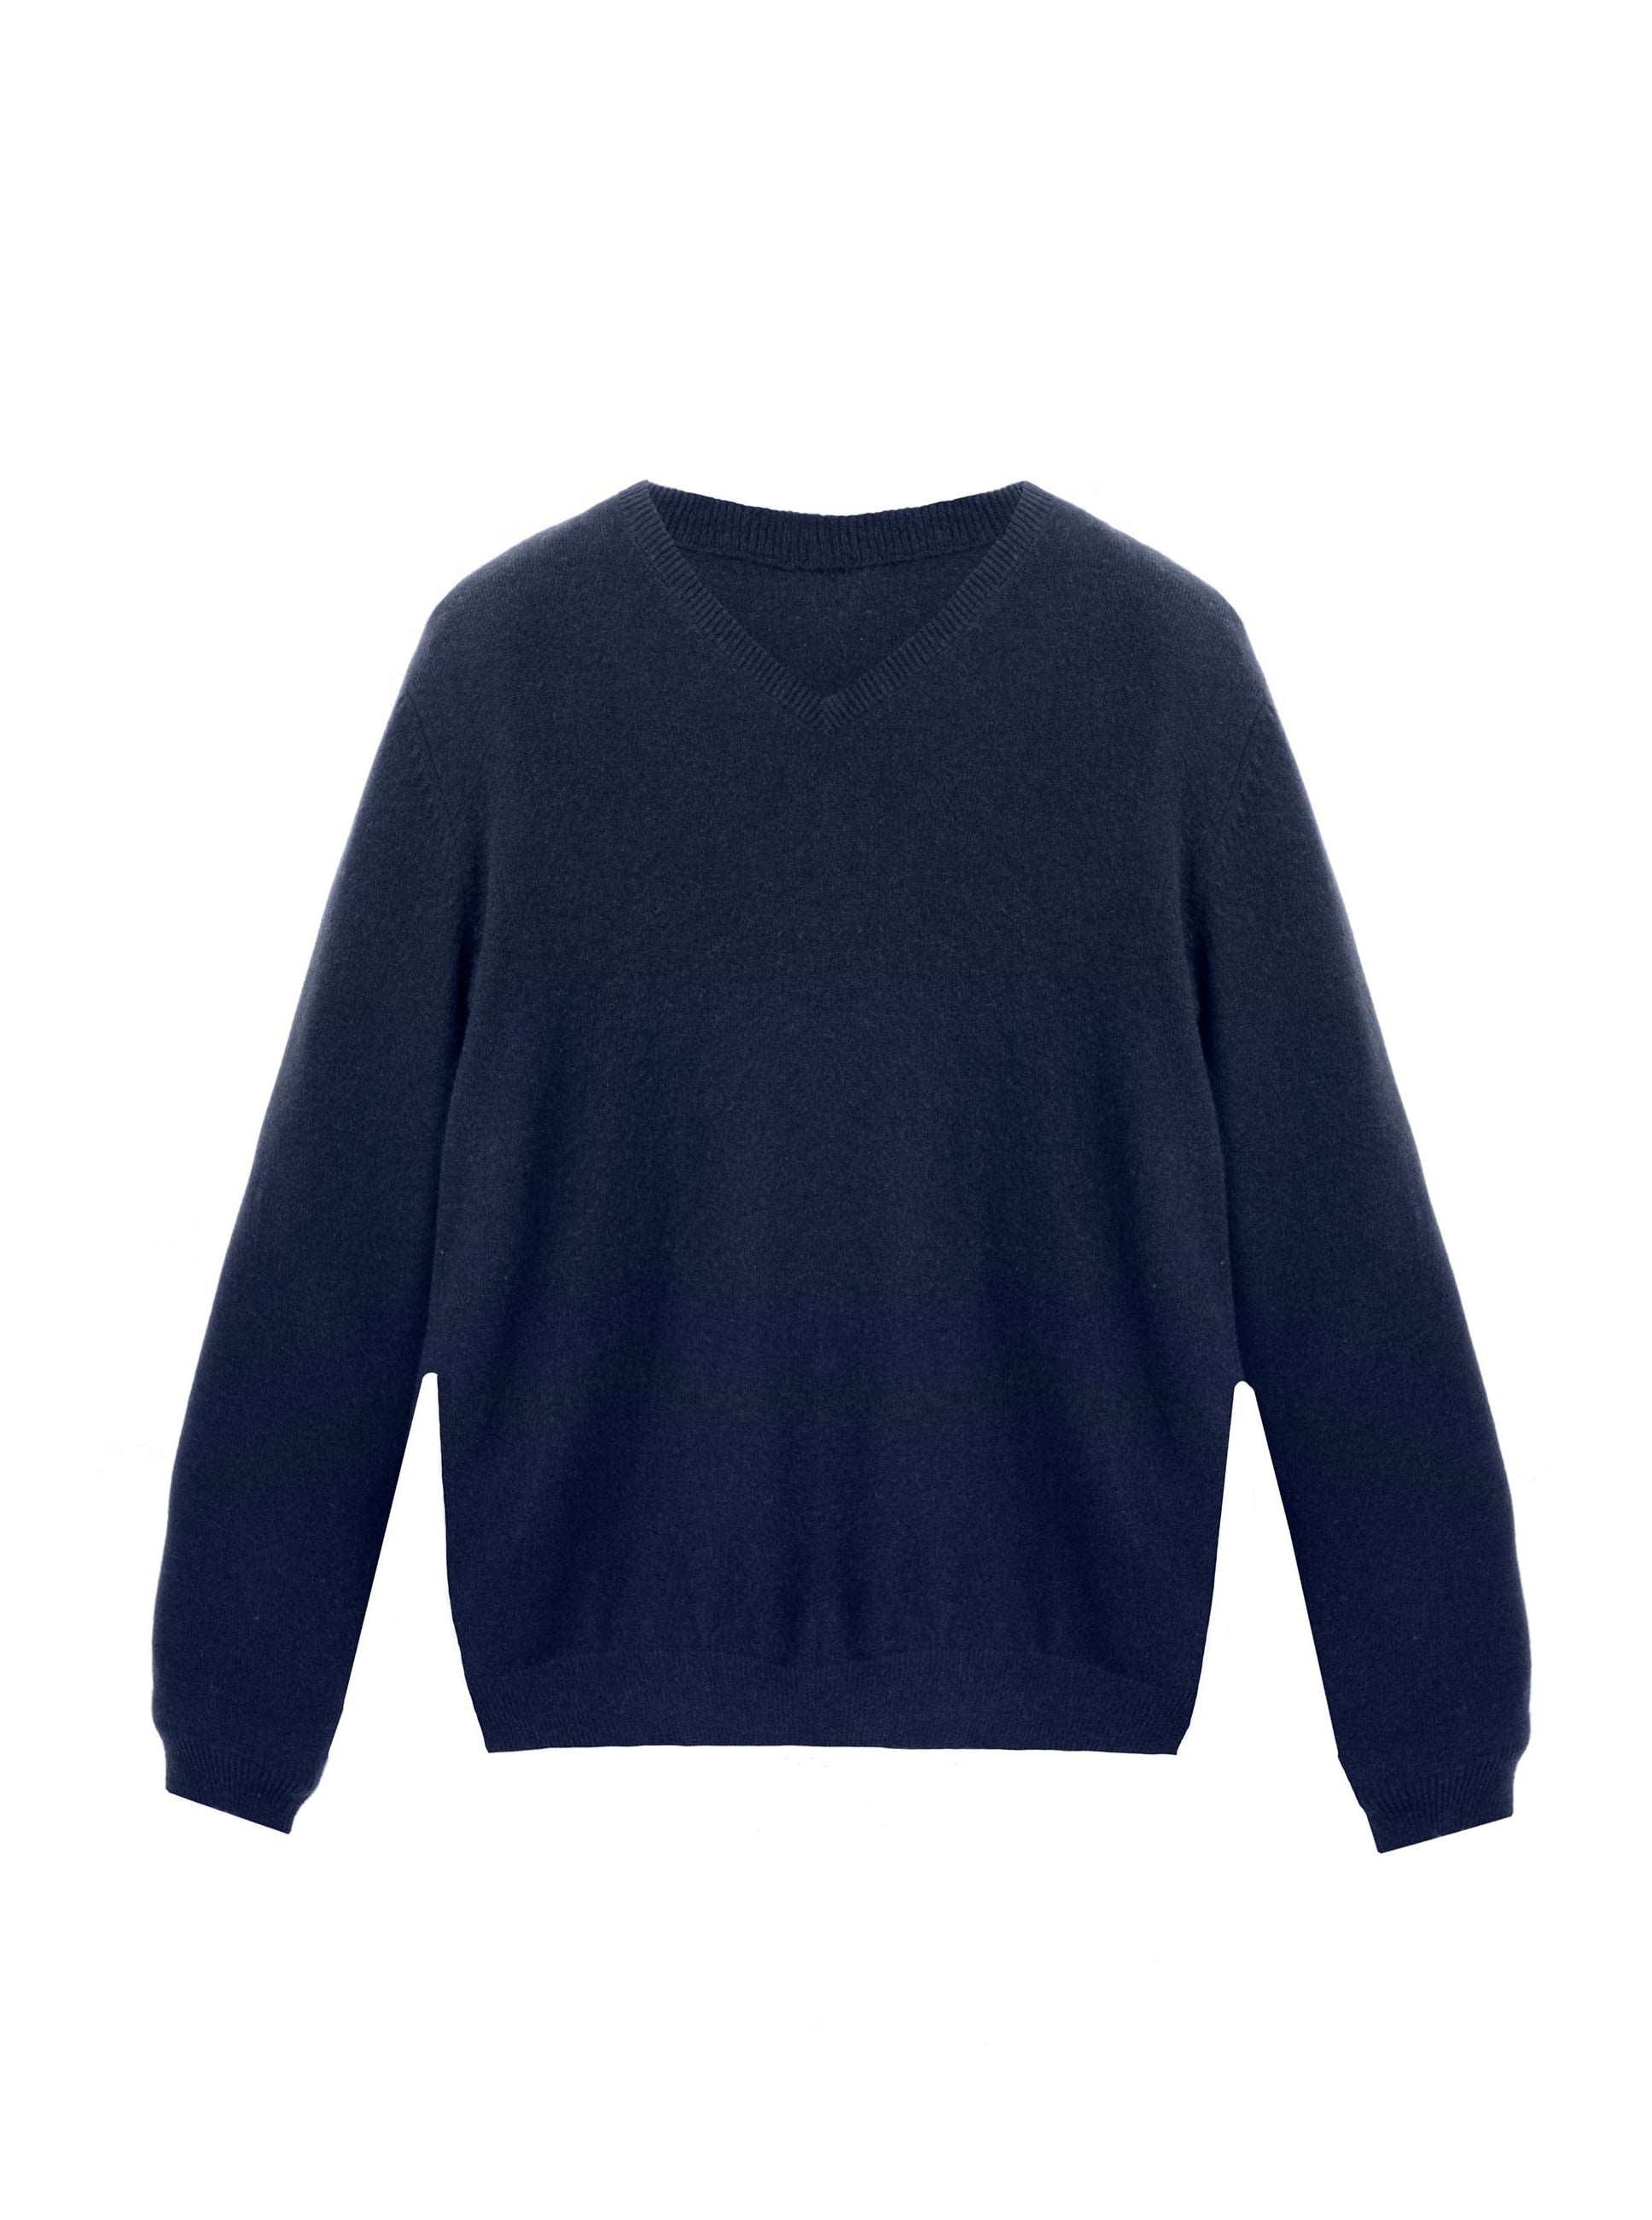 Gent's Cashmere Vee | Made to Order